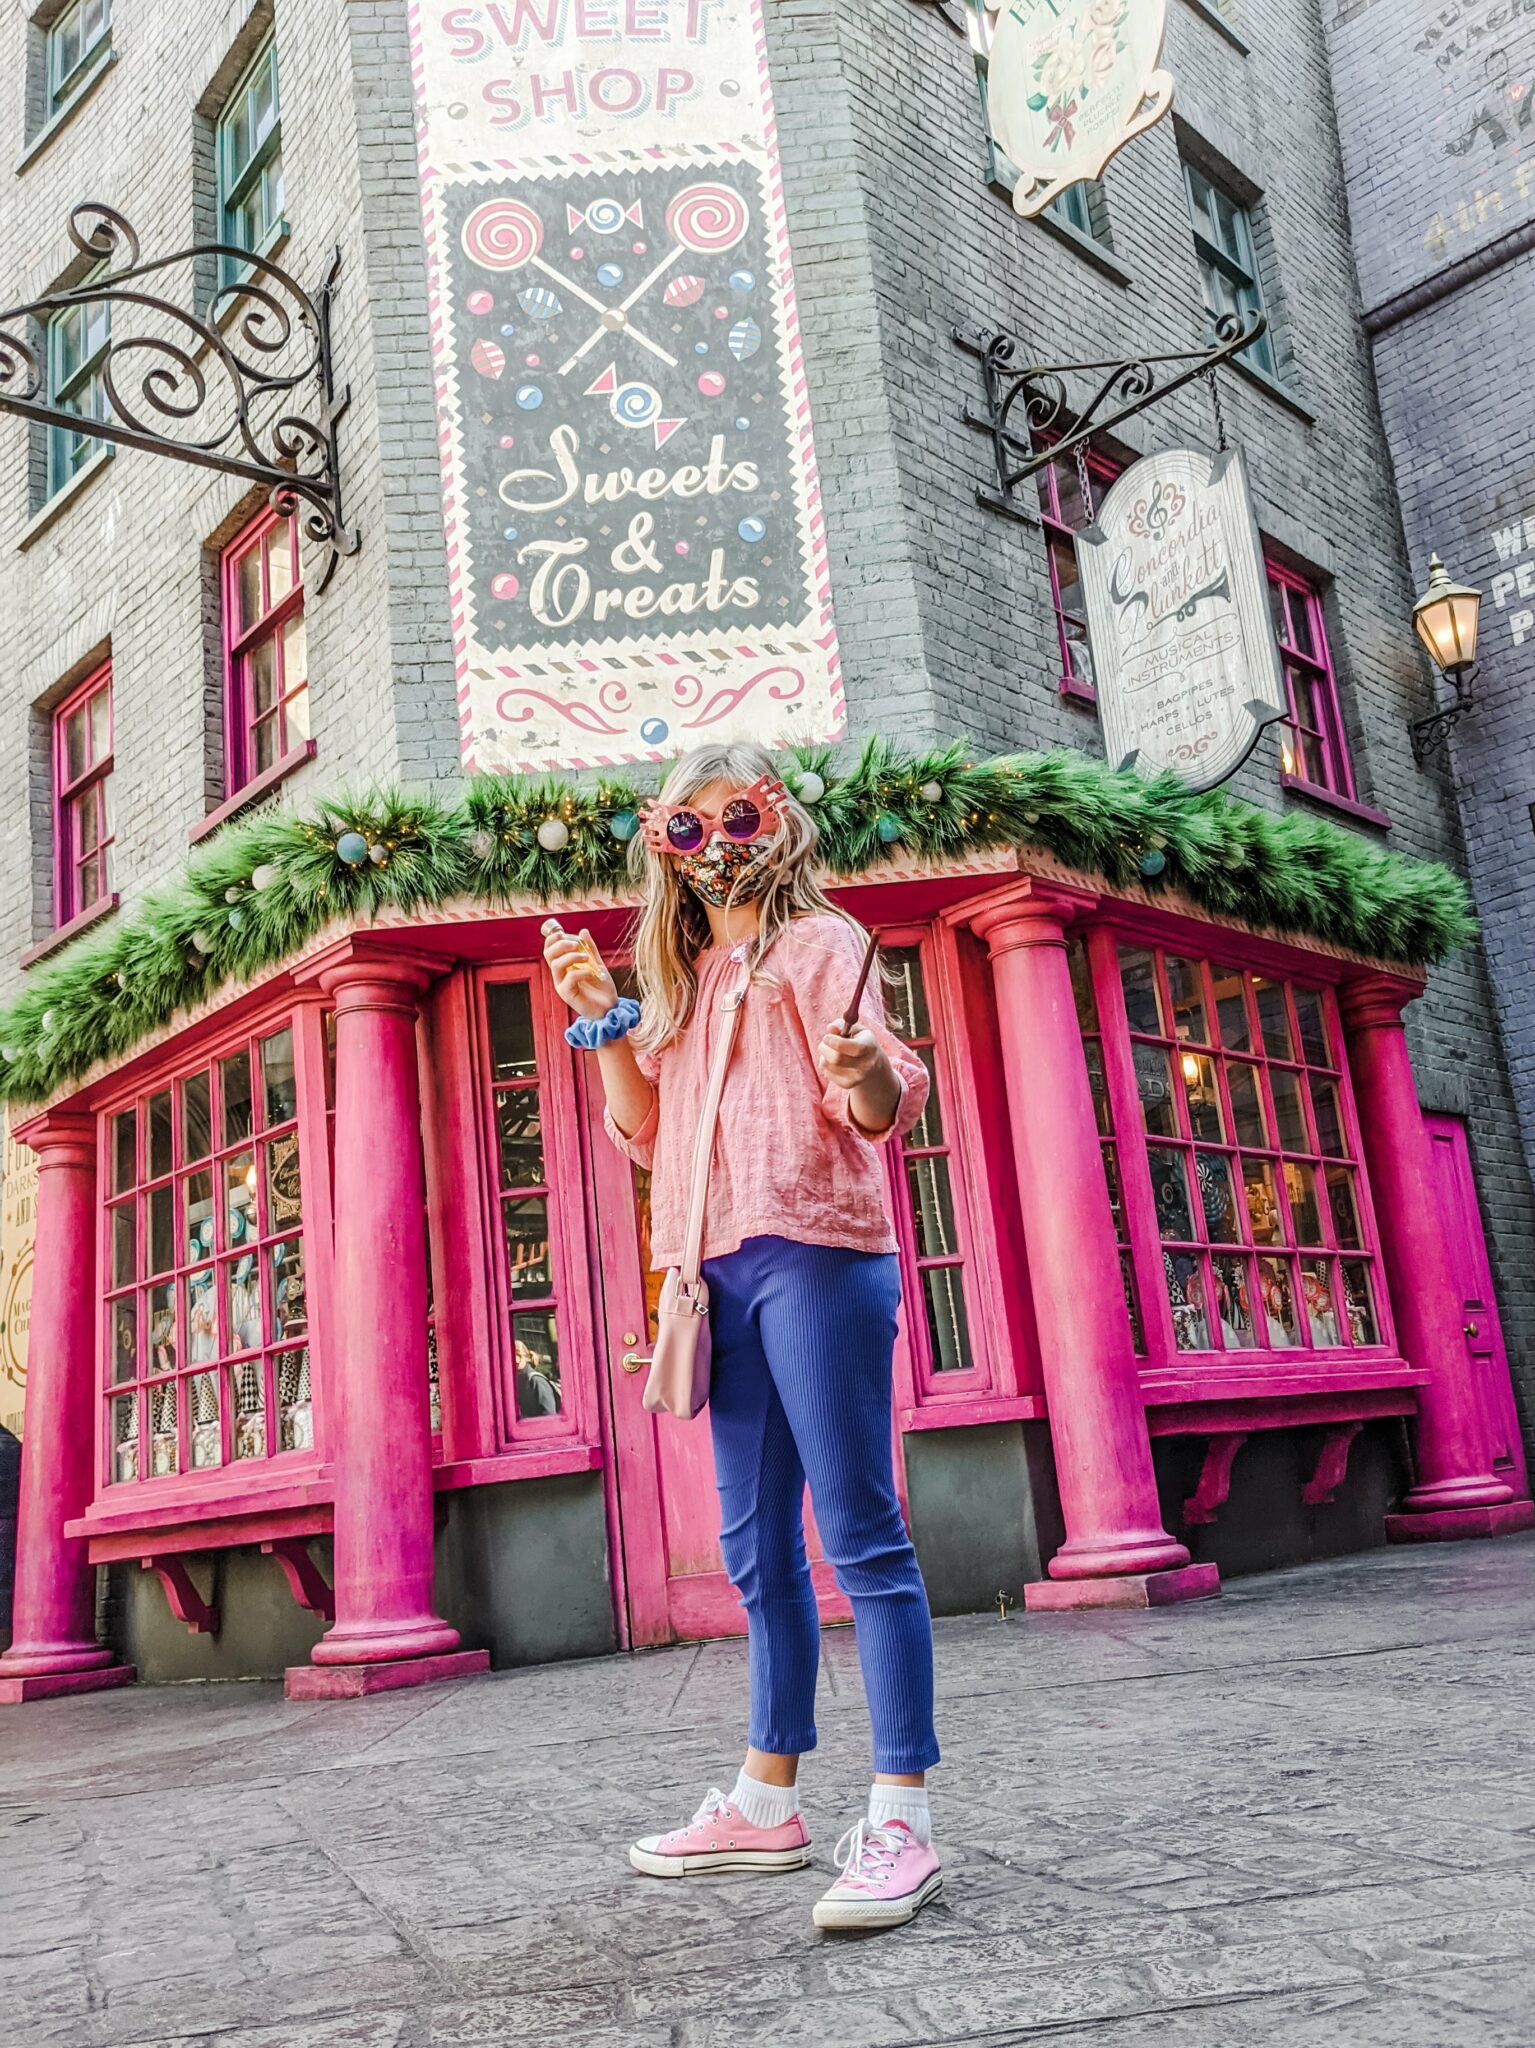 Best Photo Spots at Universal Studios Florida All Things with Purpose Sarah Lemp 26